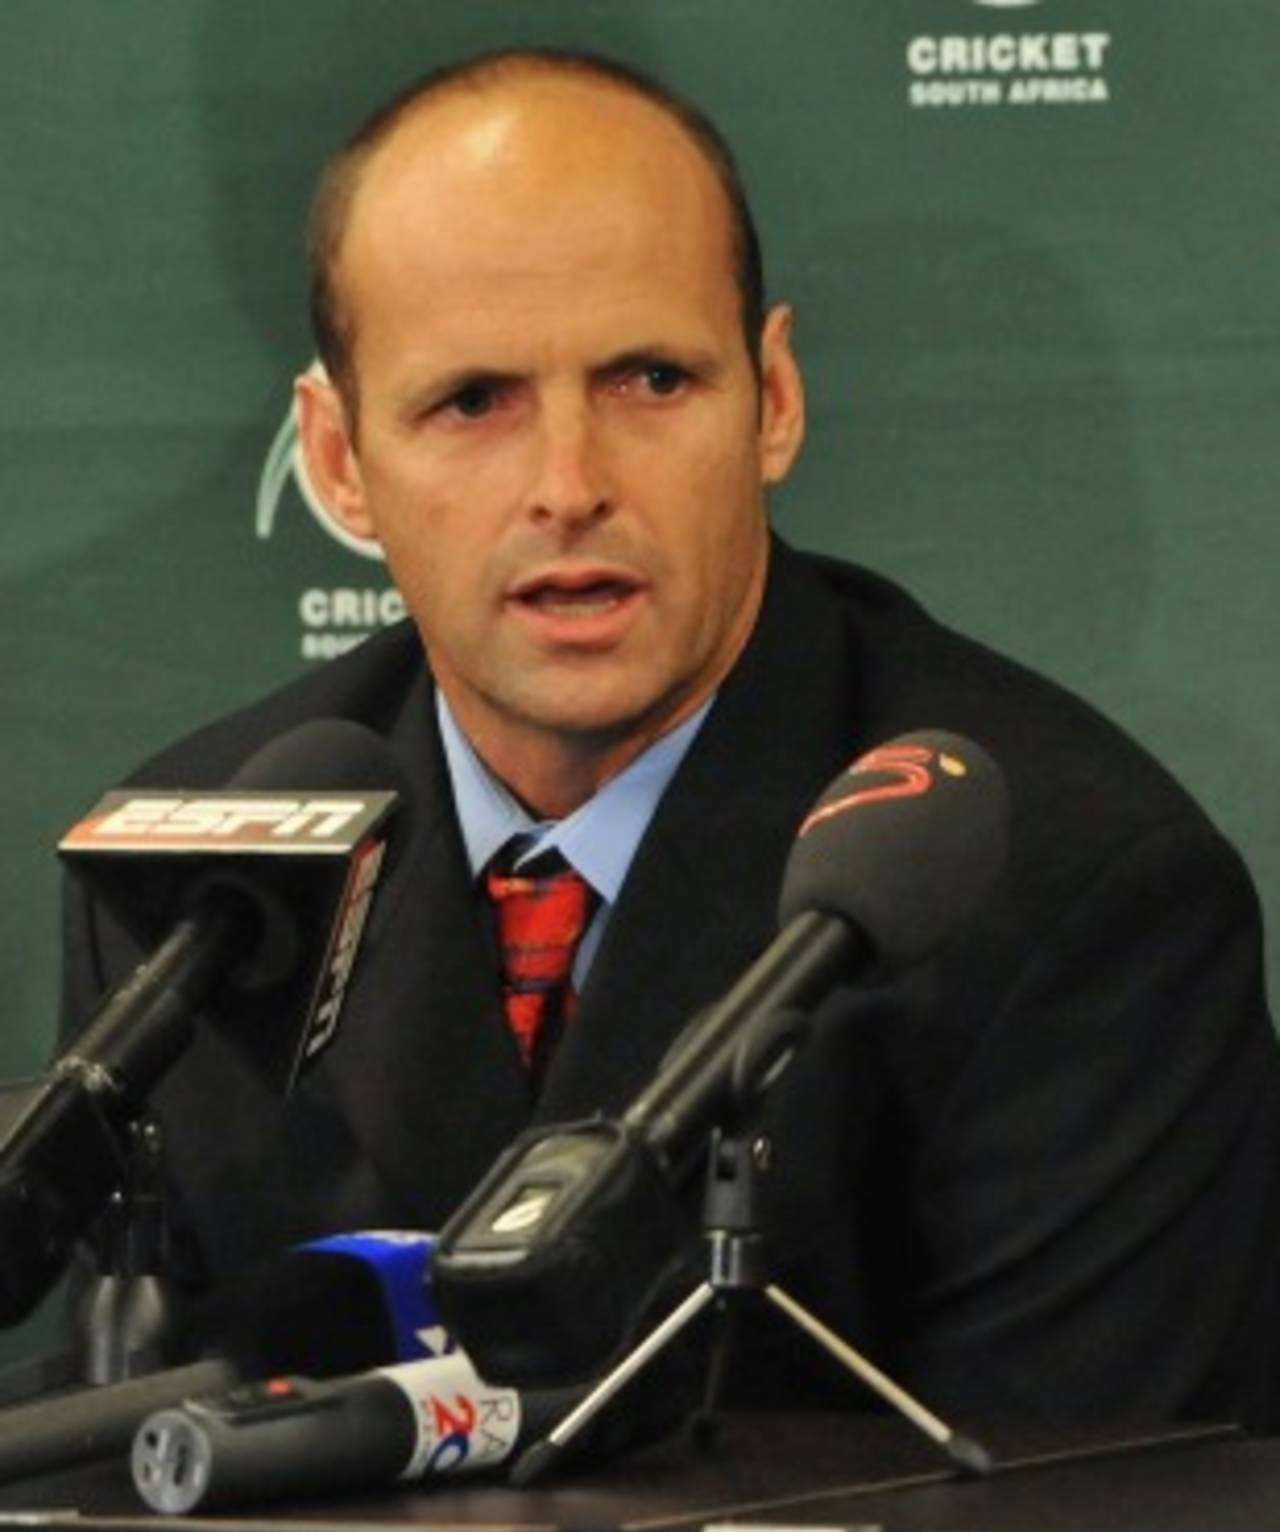 Gary Kirsten's CSA contract comes in to effect from August 1&nbsp;&nbsp;&bull;&nbsp;&nbsp;Getty Images